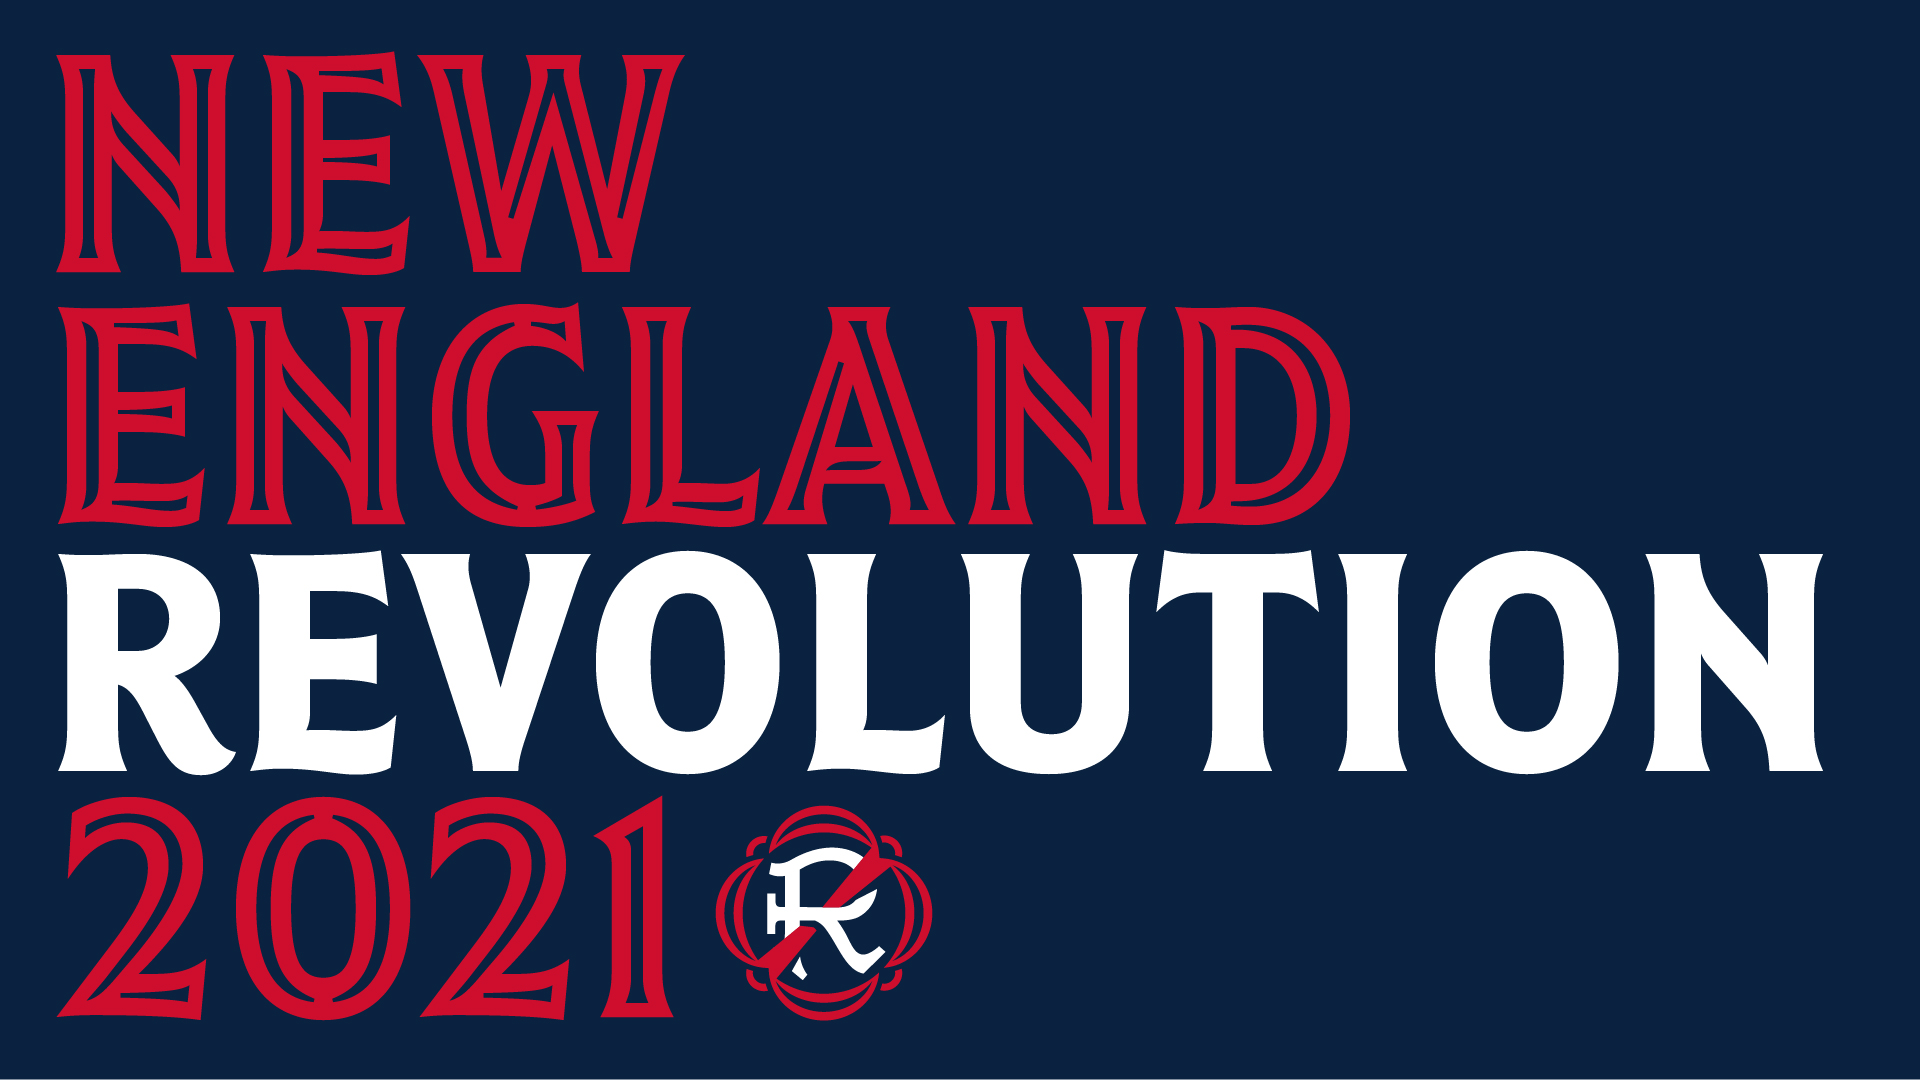 A Bold Flared Serif and Matching Inline for New England Revolution